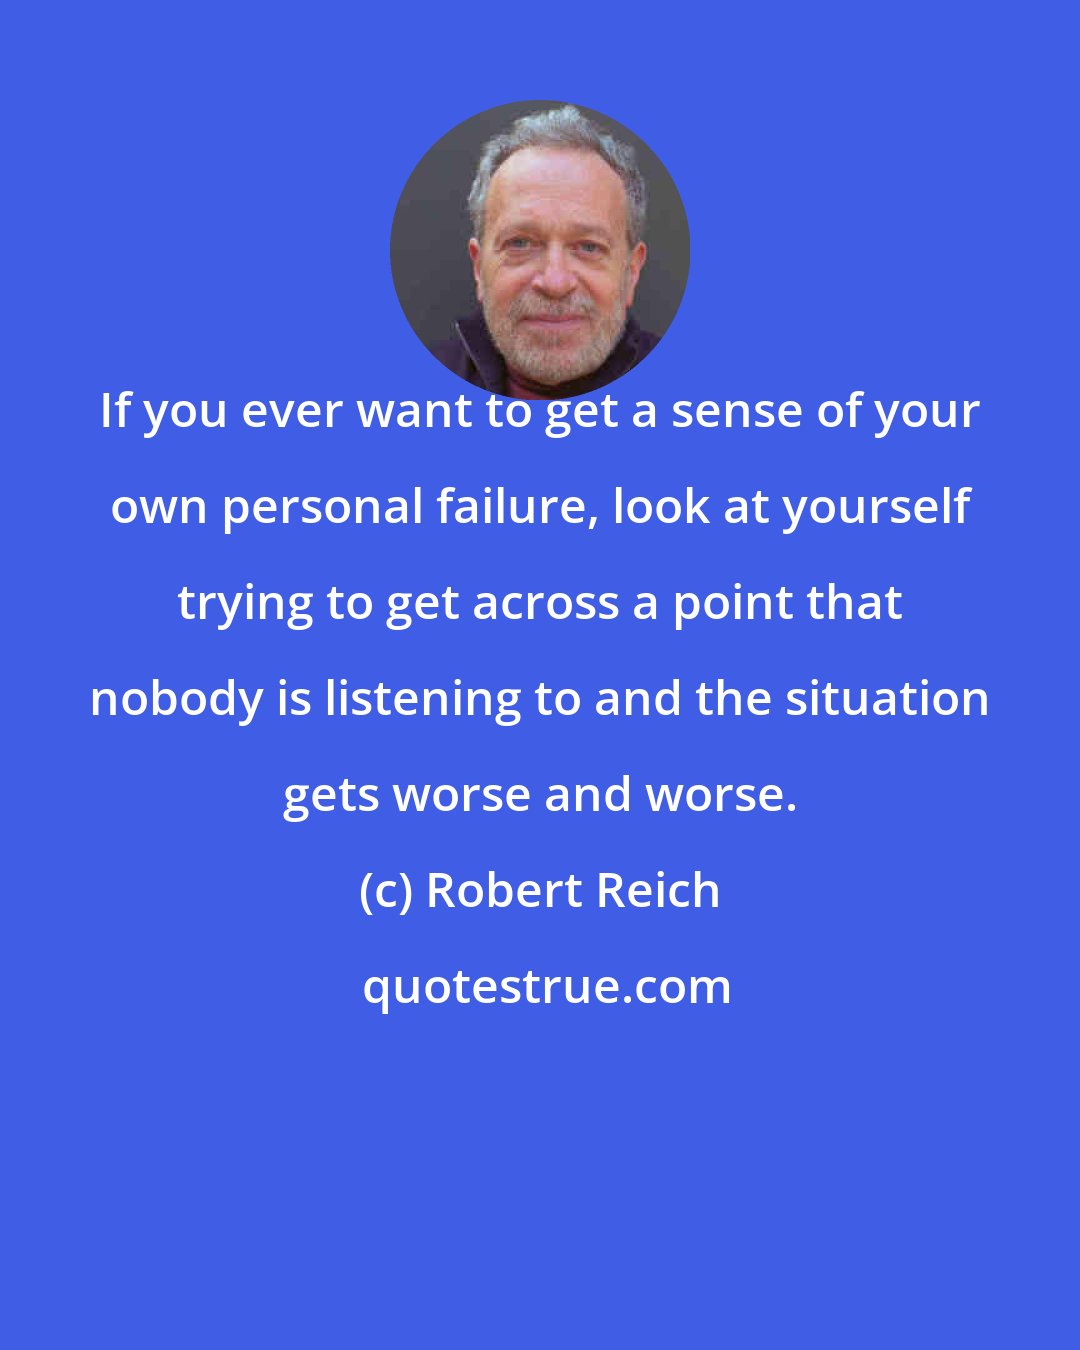 Robert Reich: If you ever want to get a sense of your own personal failure, look at yourself trying to get across a point that nobody is listening to and the situation gets worse and worse.